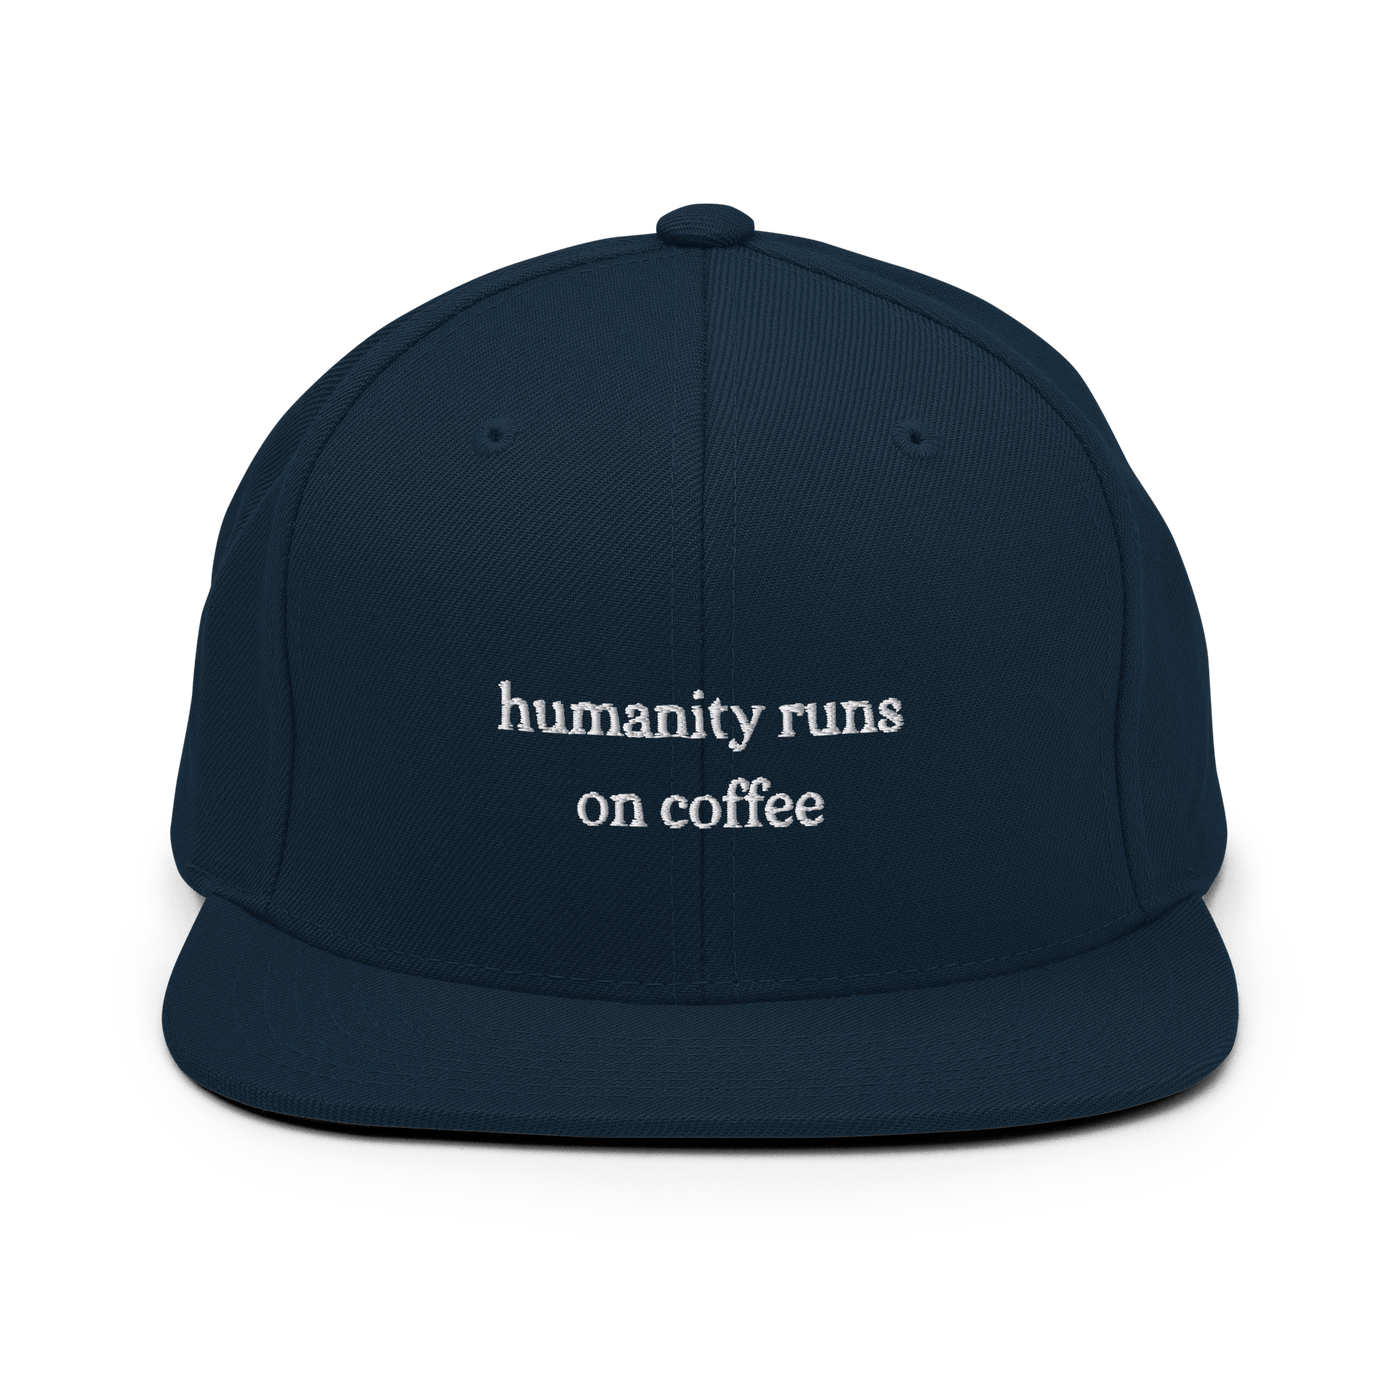 Humanity runs on coffee Snapback Hat - Dark Navy - - Just Another Cap Store